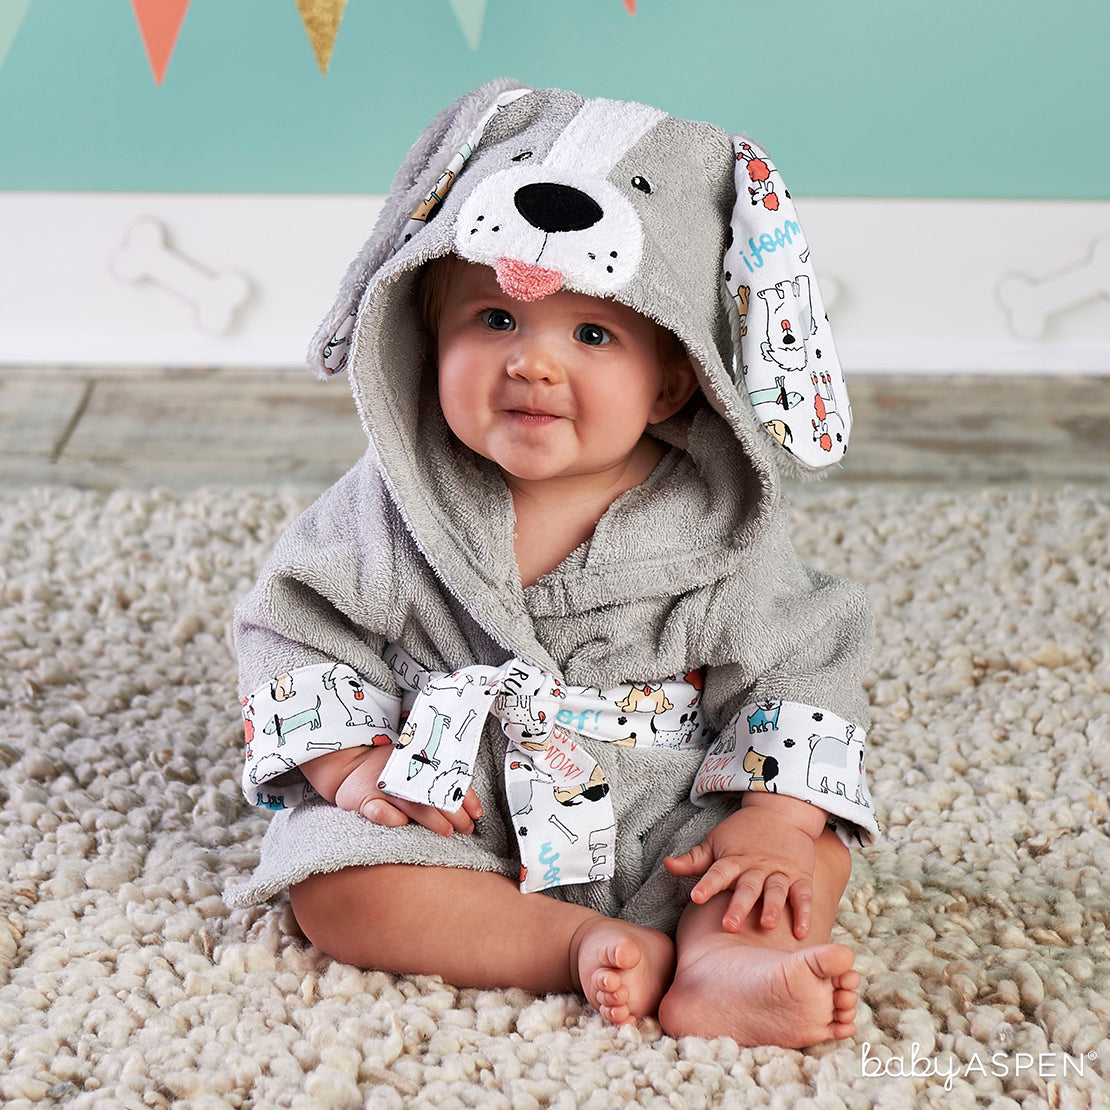 Puppy Hooded Robe | 6 Gifts for a Puppy Themed Baby Shower | Baby Aspen